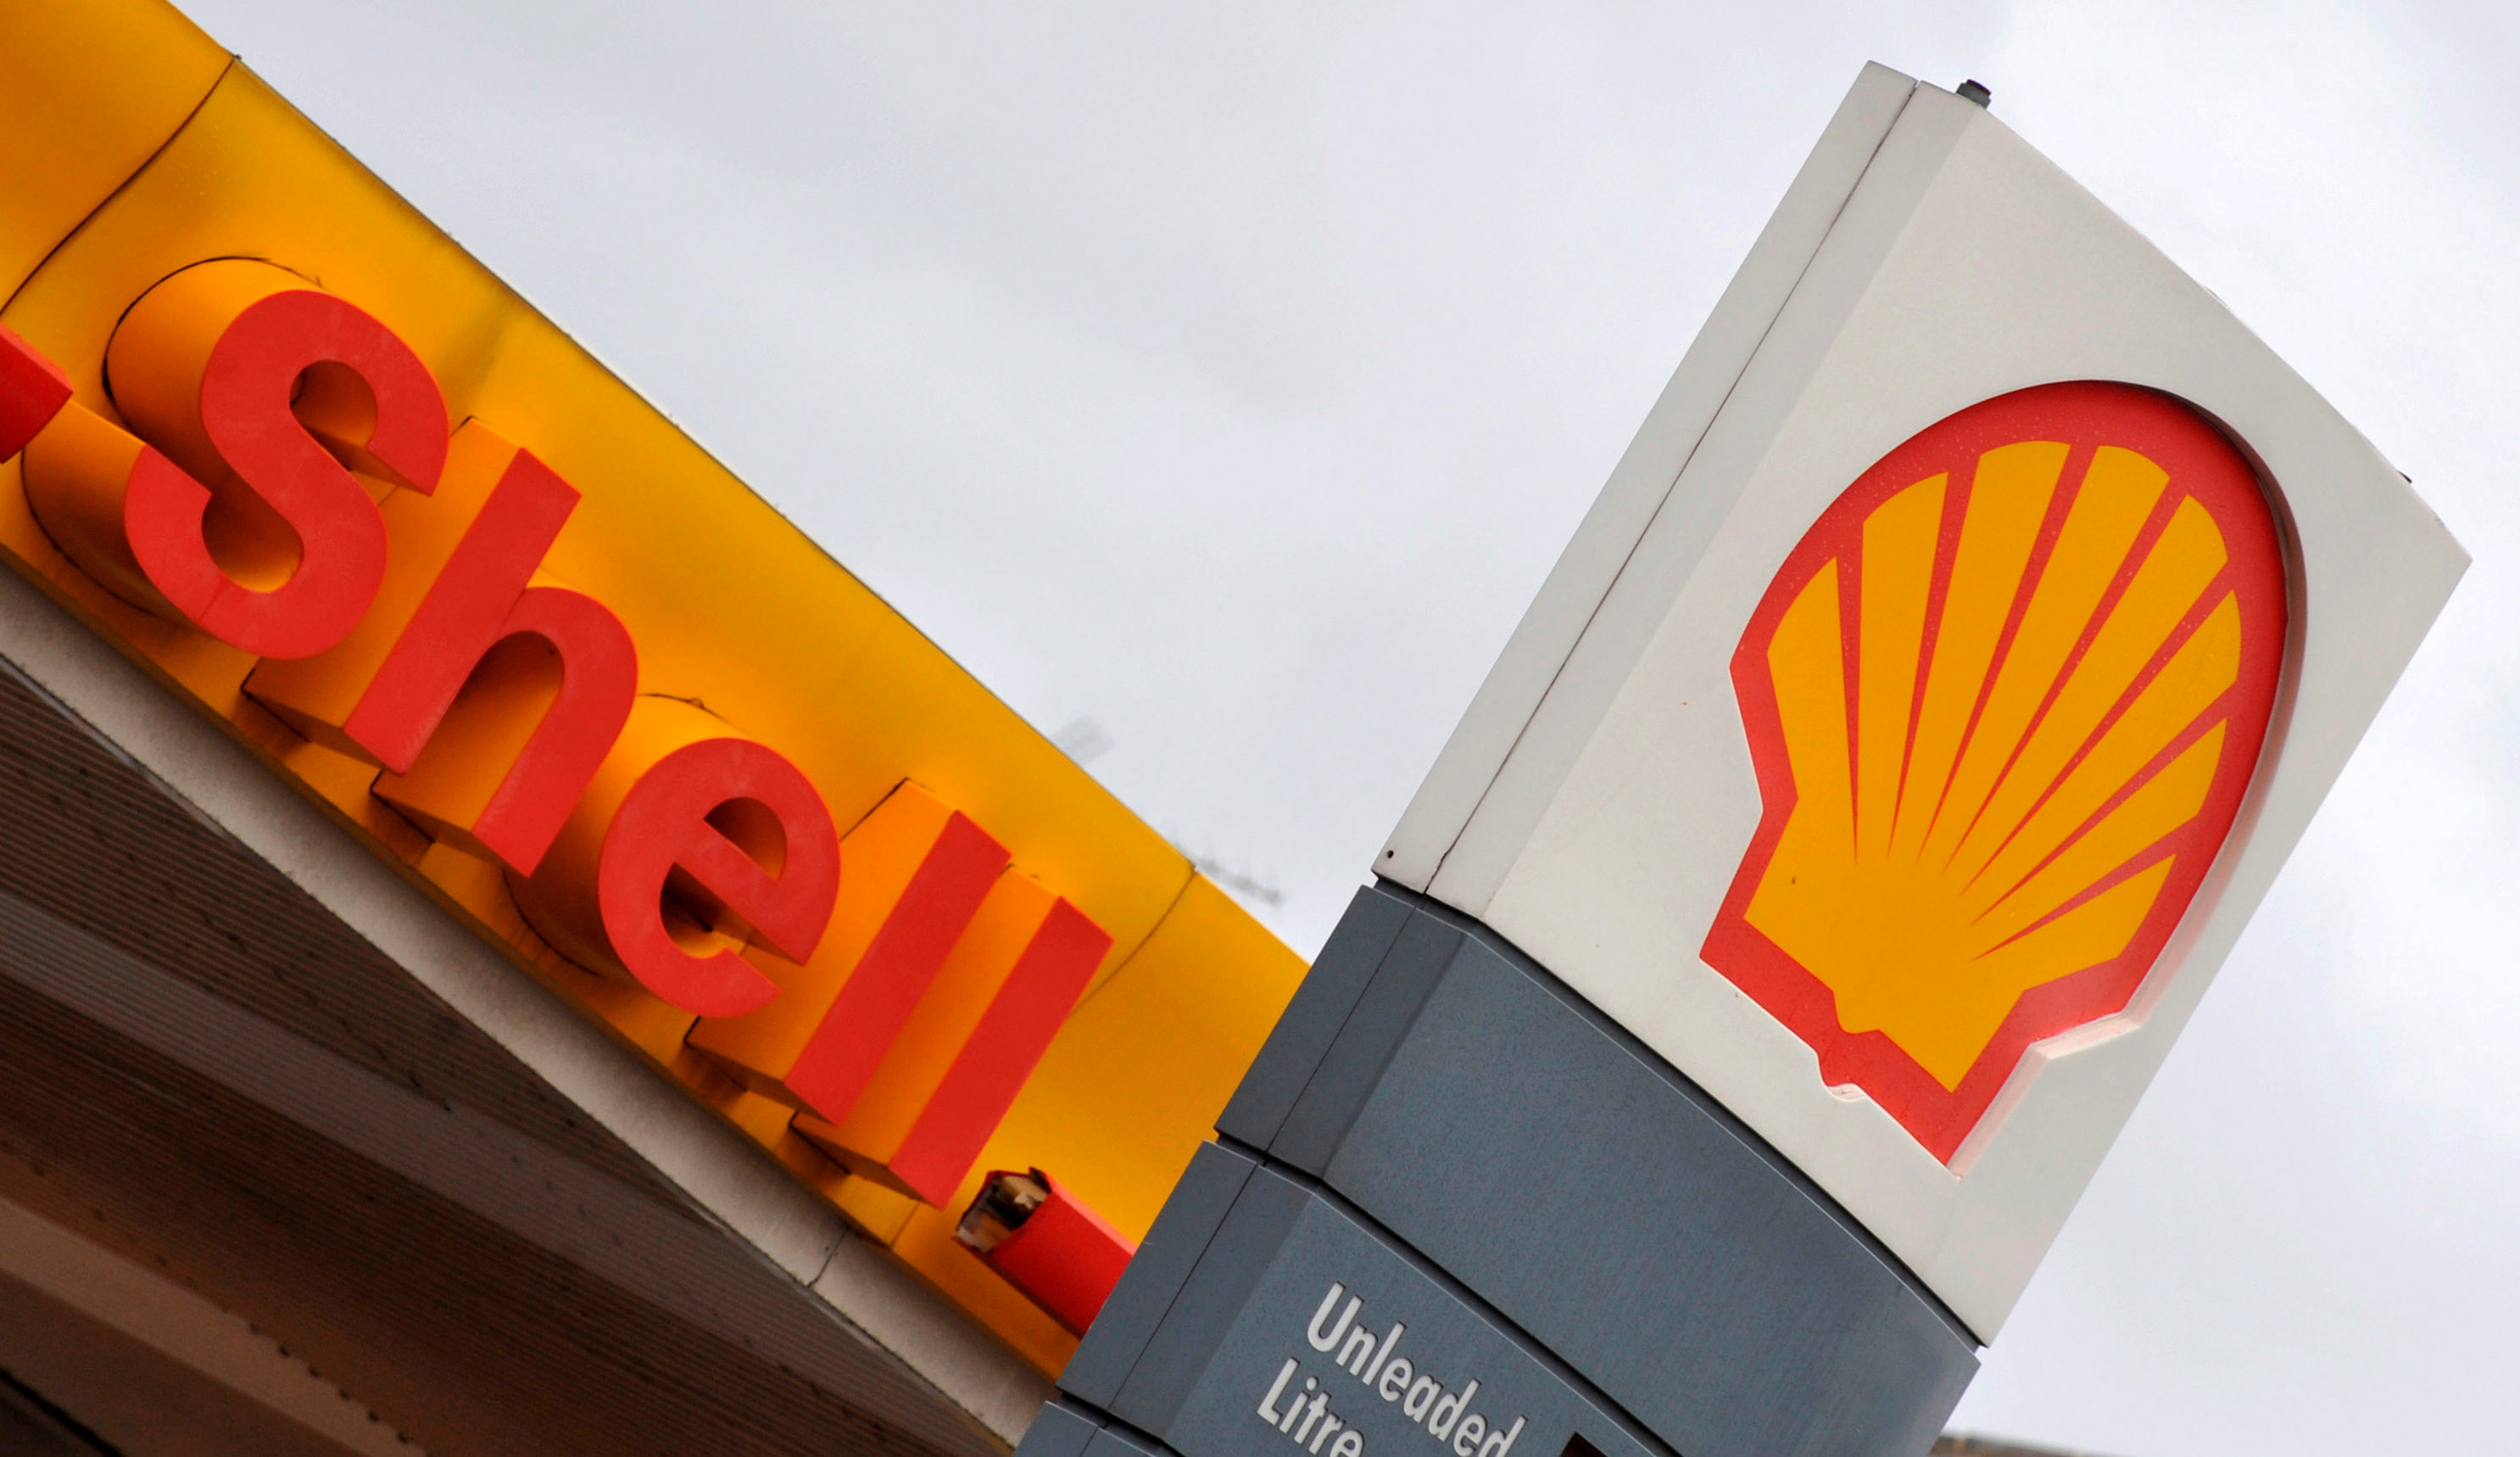 The Royal Dutch Shell logo is seen at a Shell petrol station in London, January 31, 2008. REUTERS/Toby Melville/File Photo